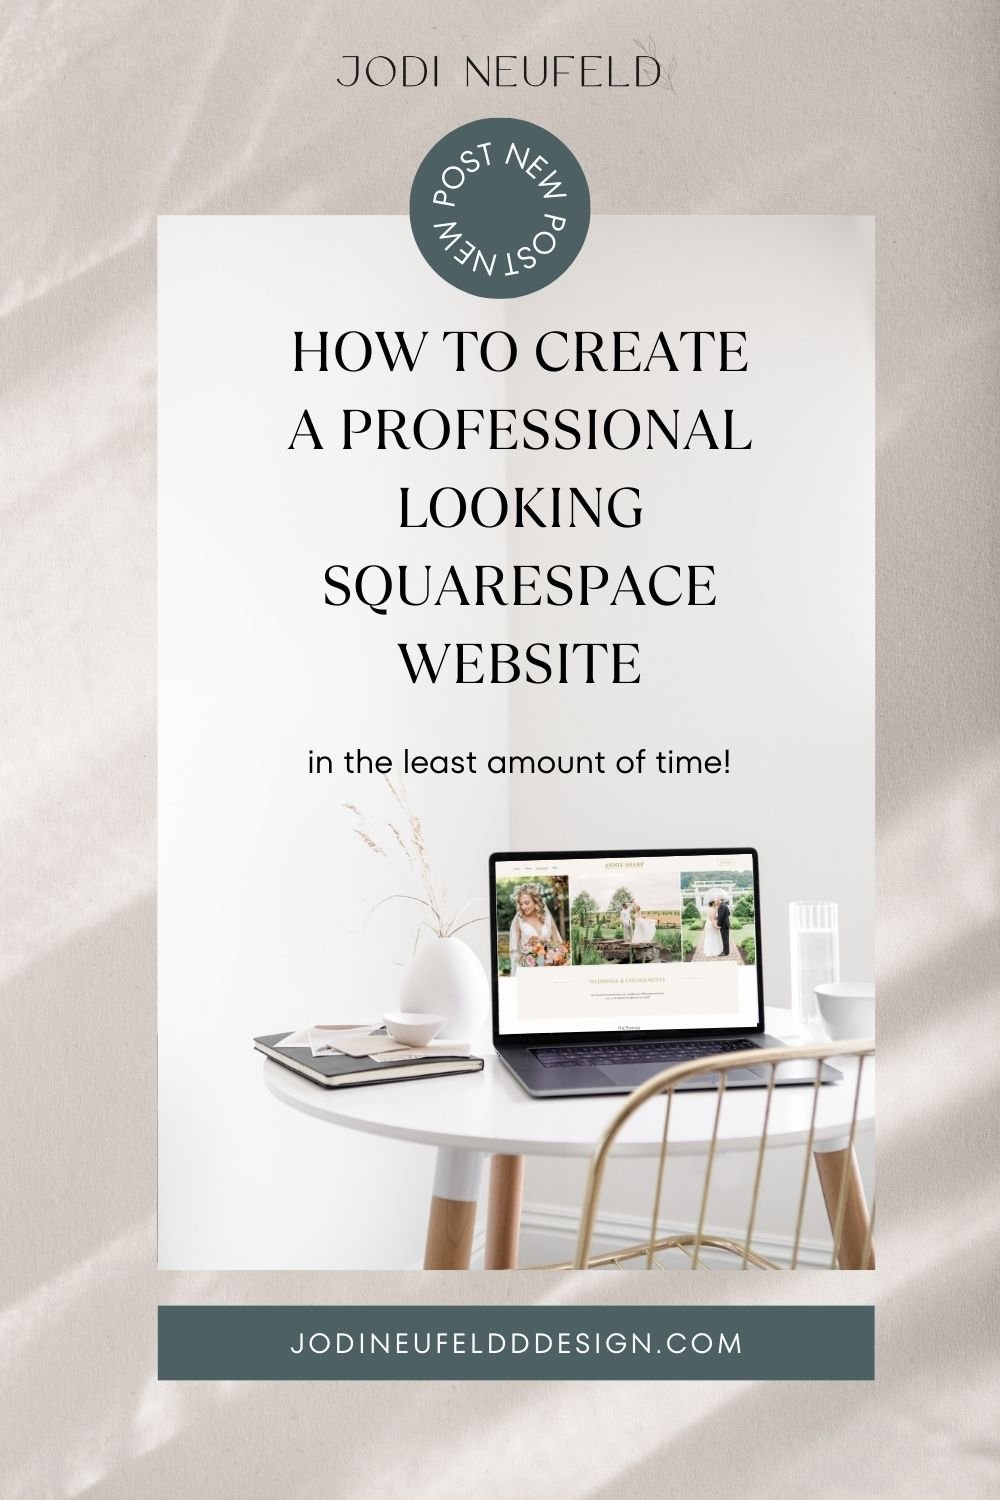 How to Build your Squarespace website efficiently - tips and tricks 3.jpg